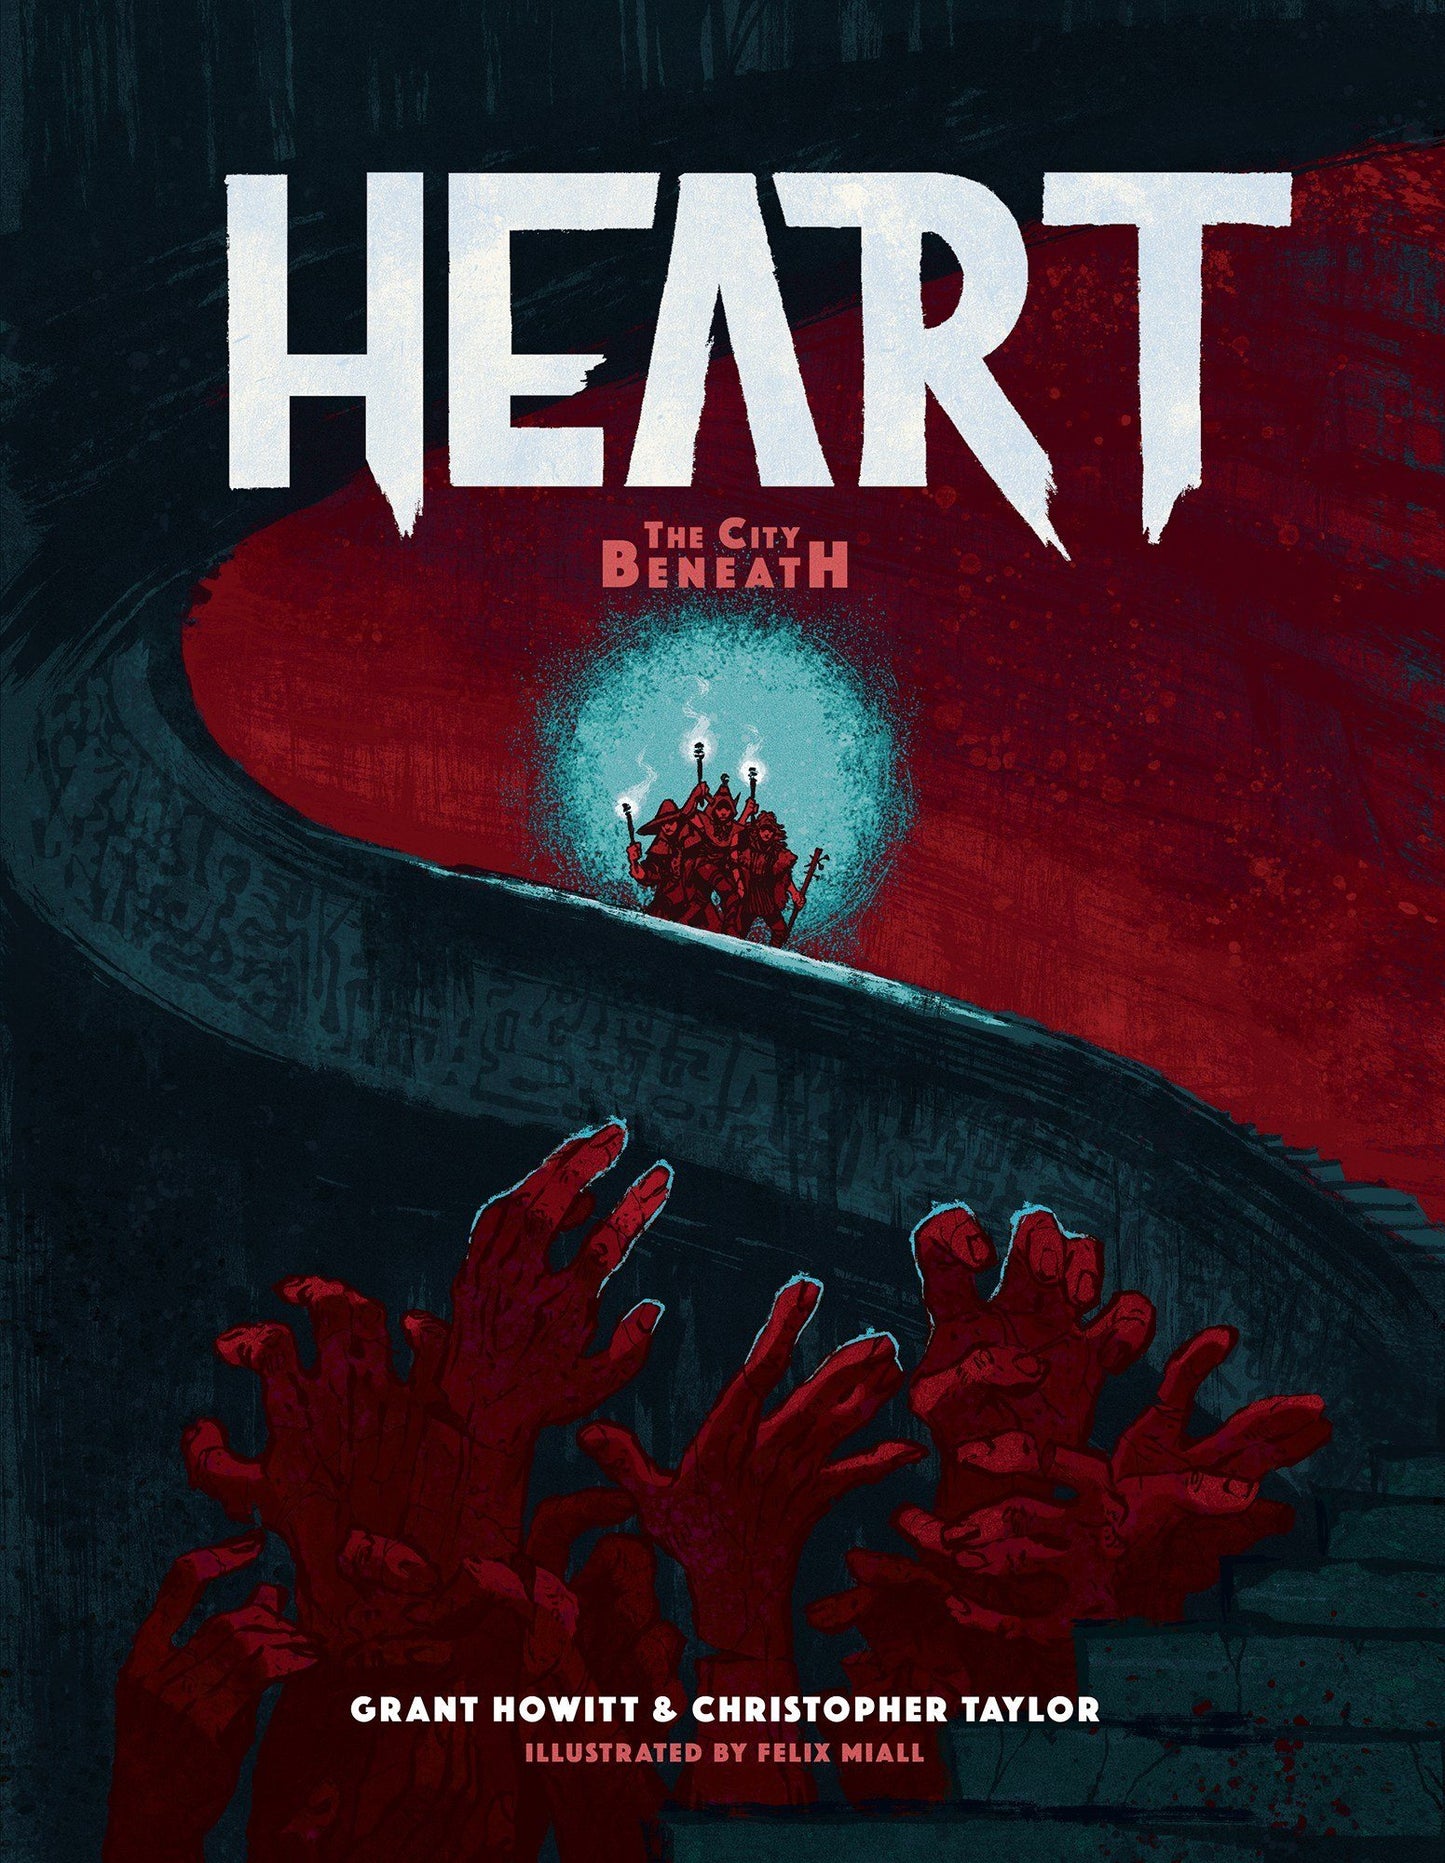 Heart: The City Beneath RPG Role Playing Game Rowan Roock and Decard 